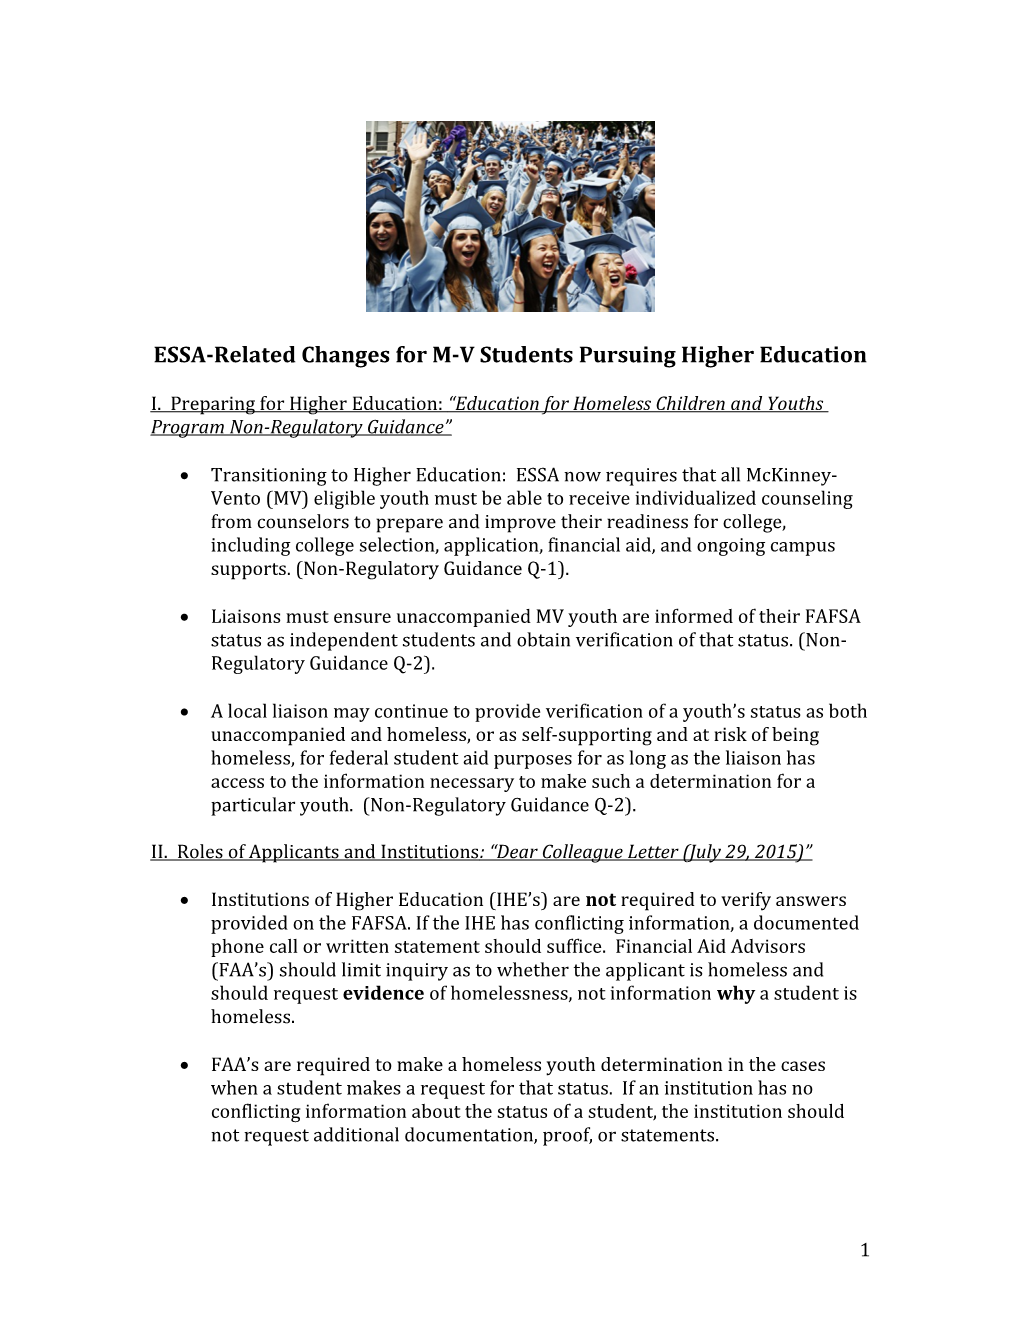 ESSA-Related Changes for M-V Students Pursuing Higher Education